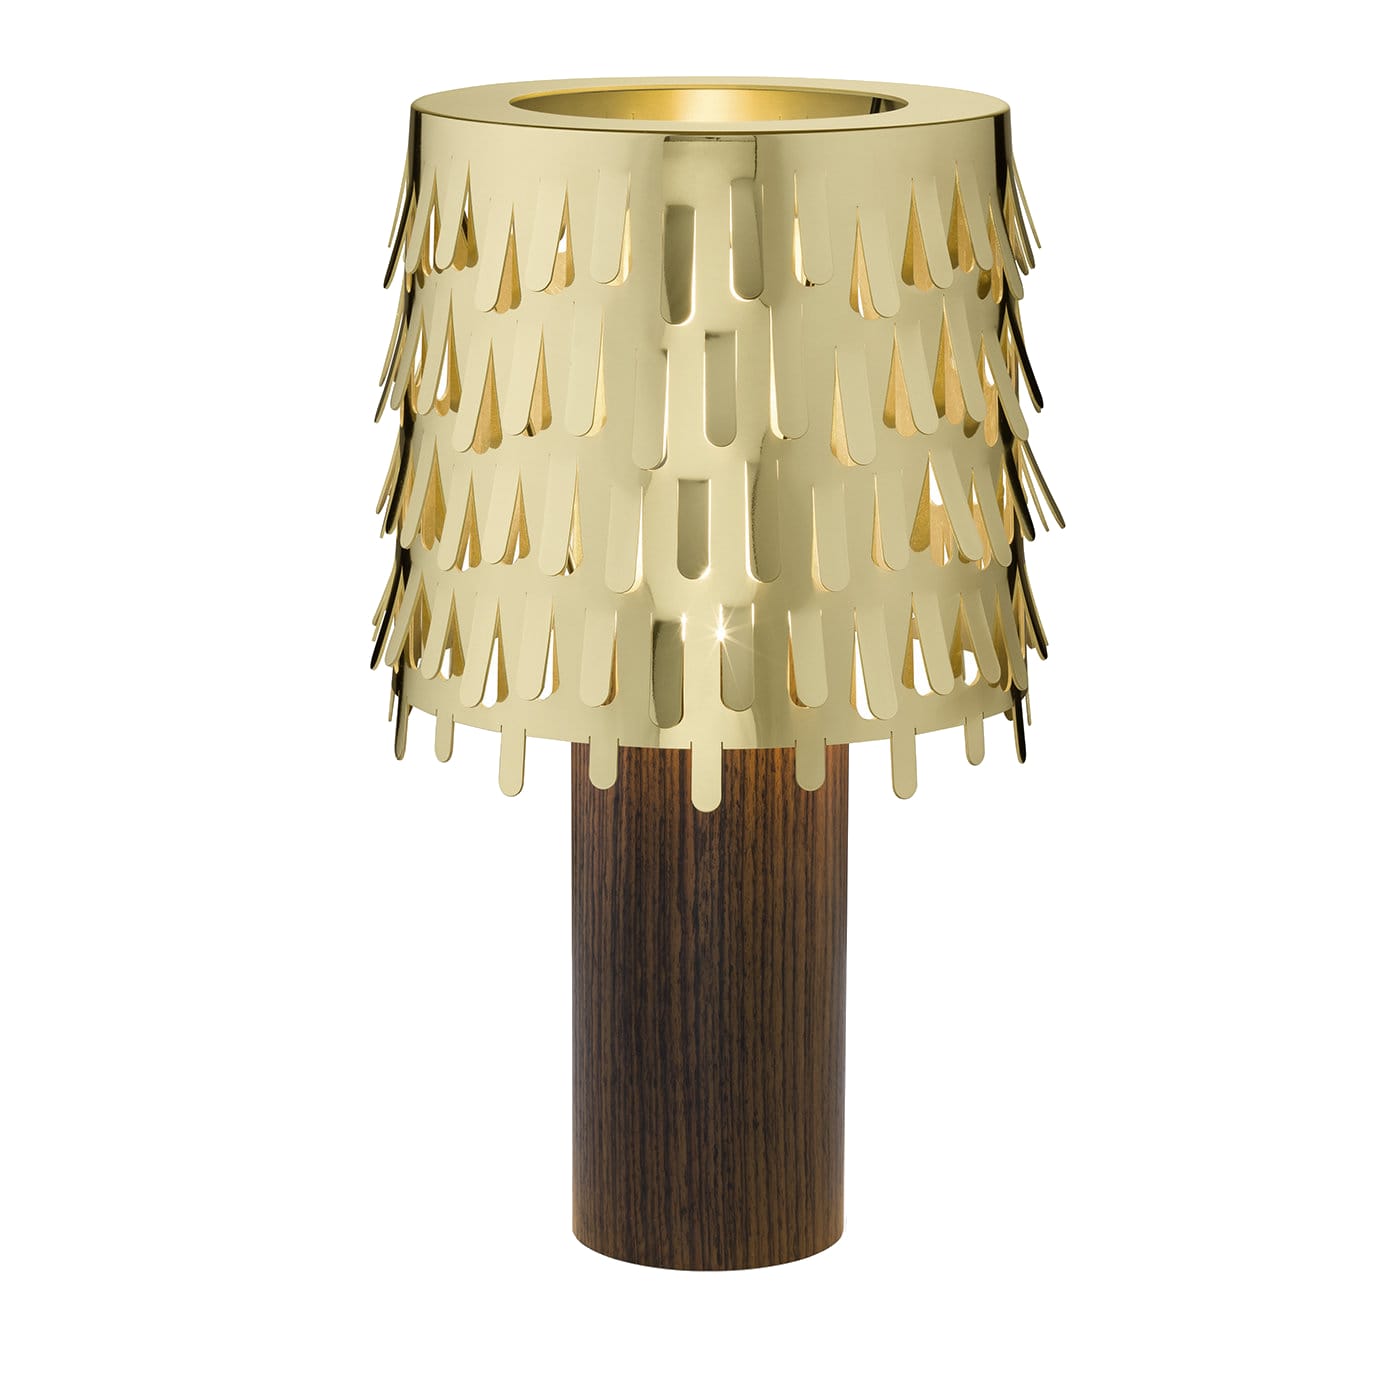 Jack Fruit Table Lamp by Campana Brothers - Ghidini 1961